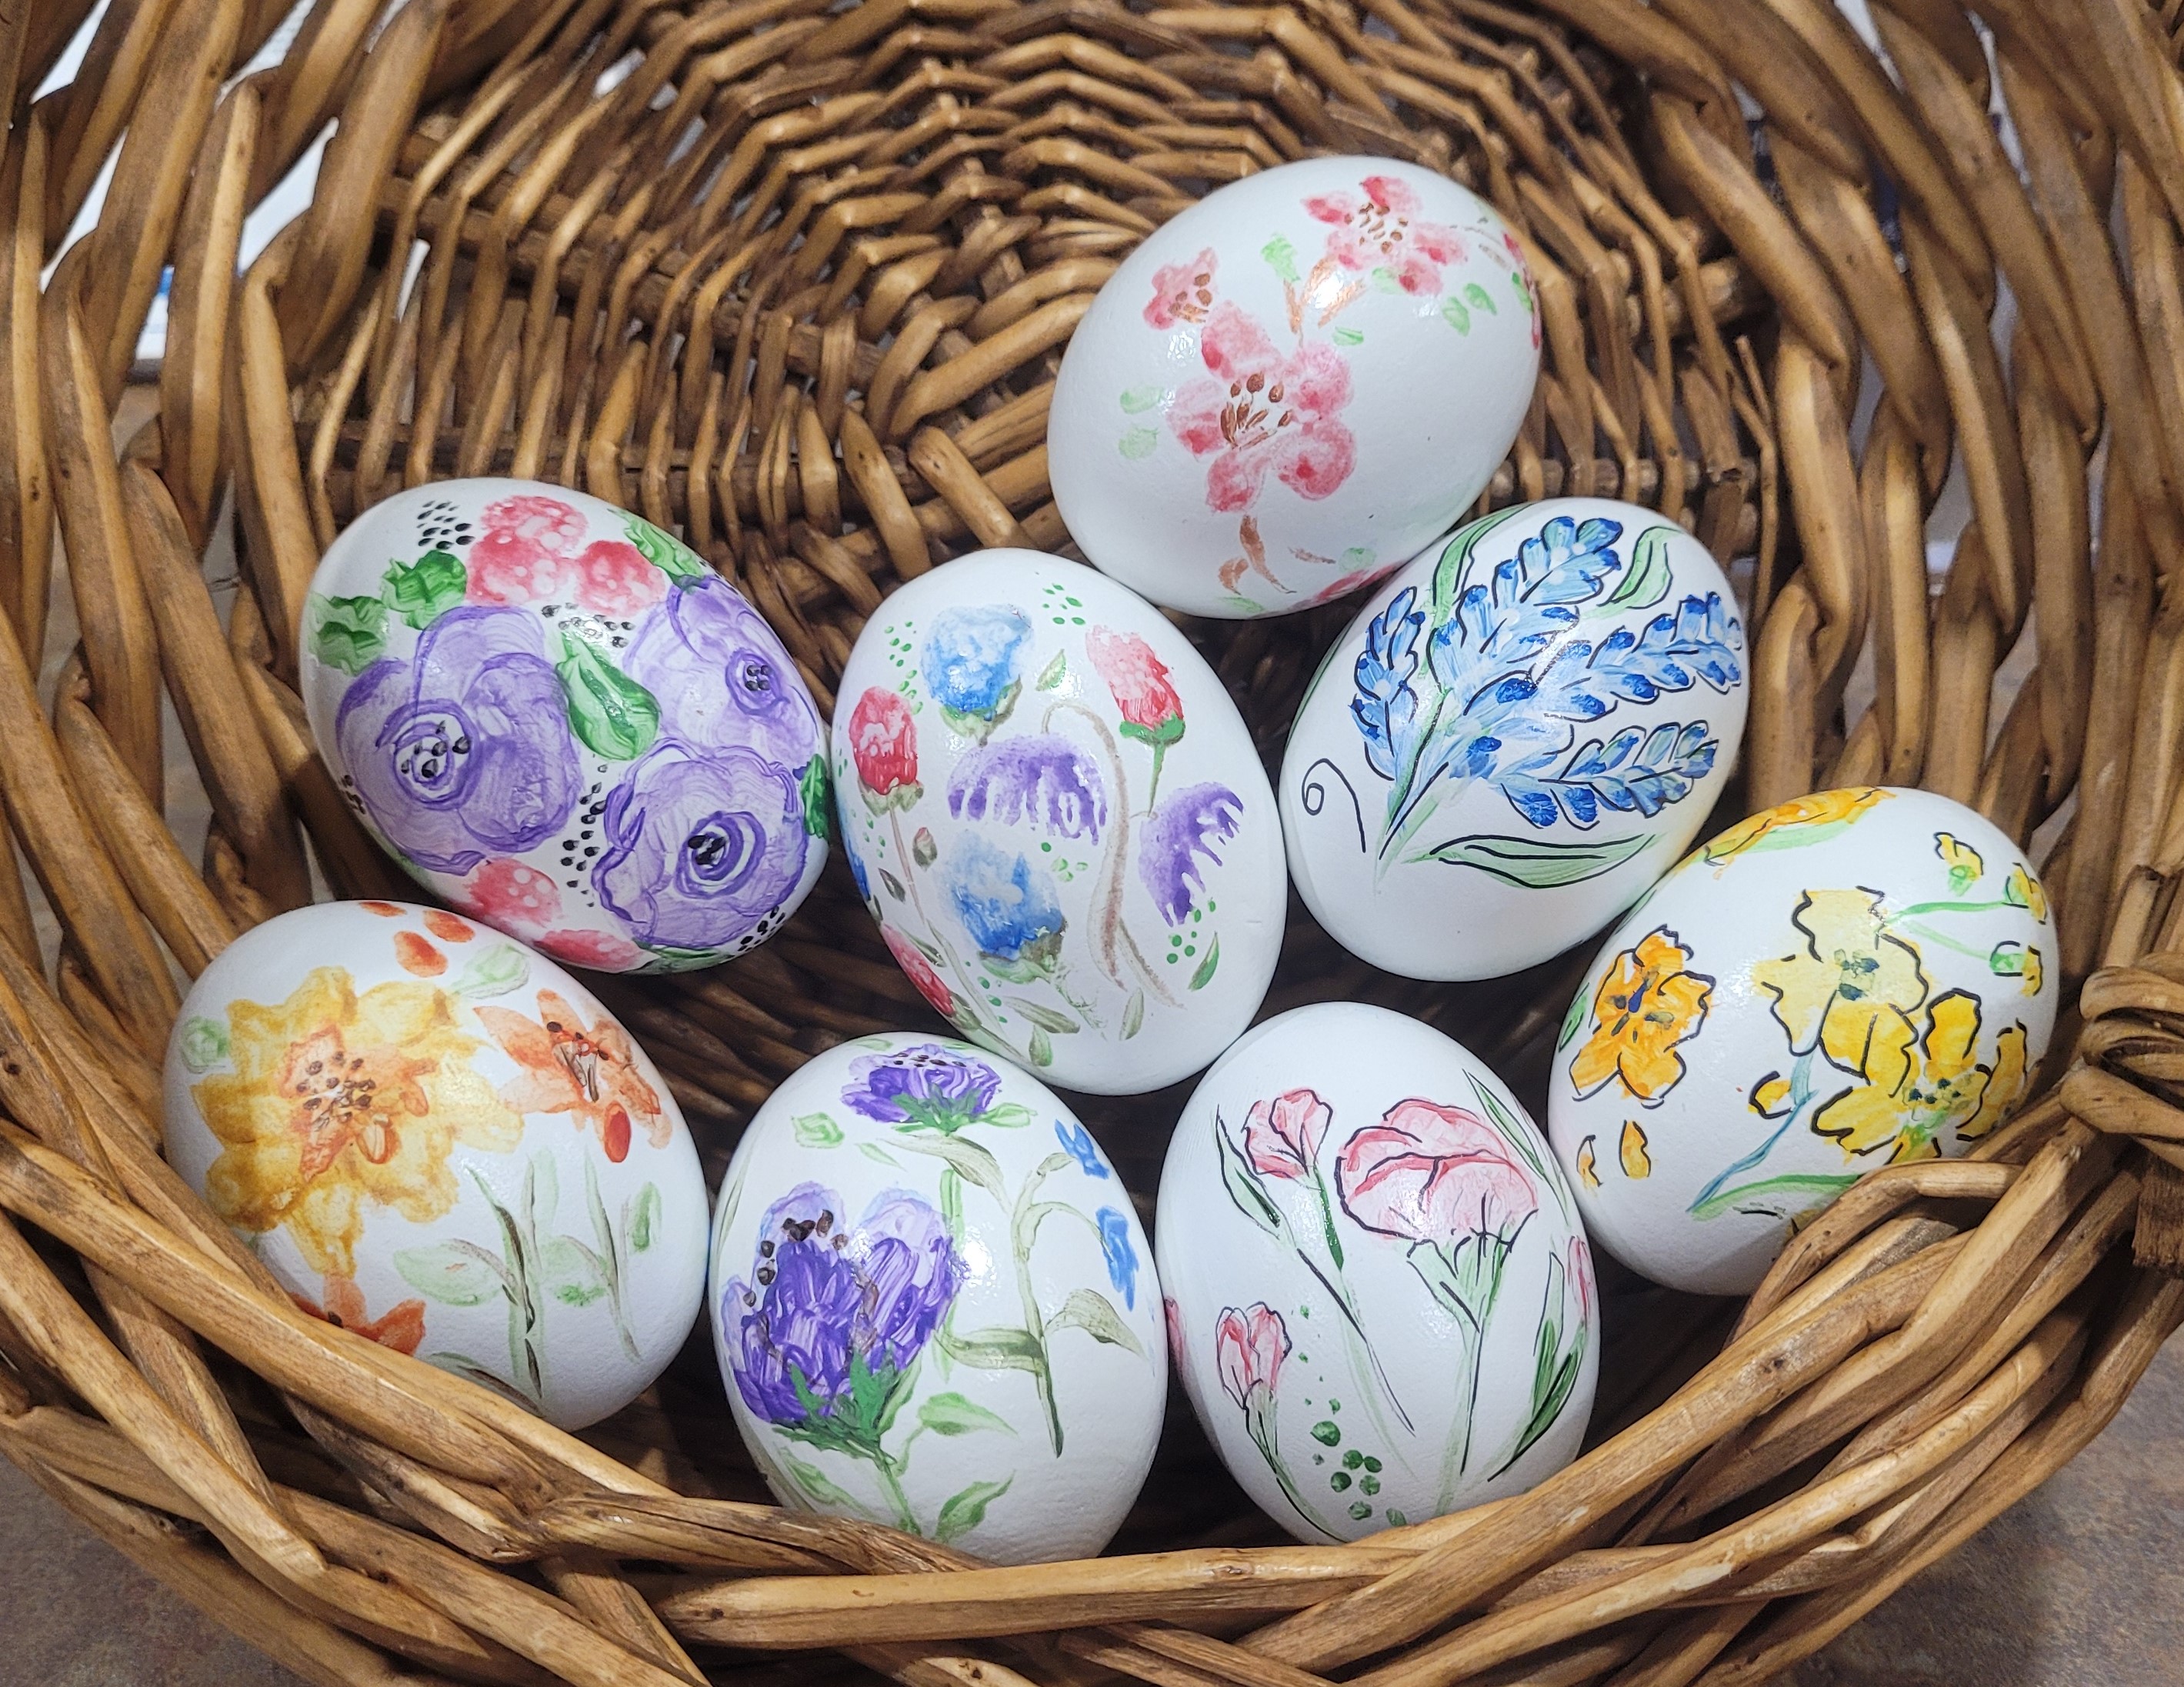 White eggs painted with pastel flowers in a basket.